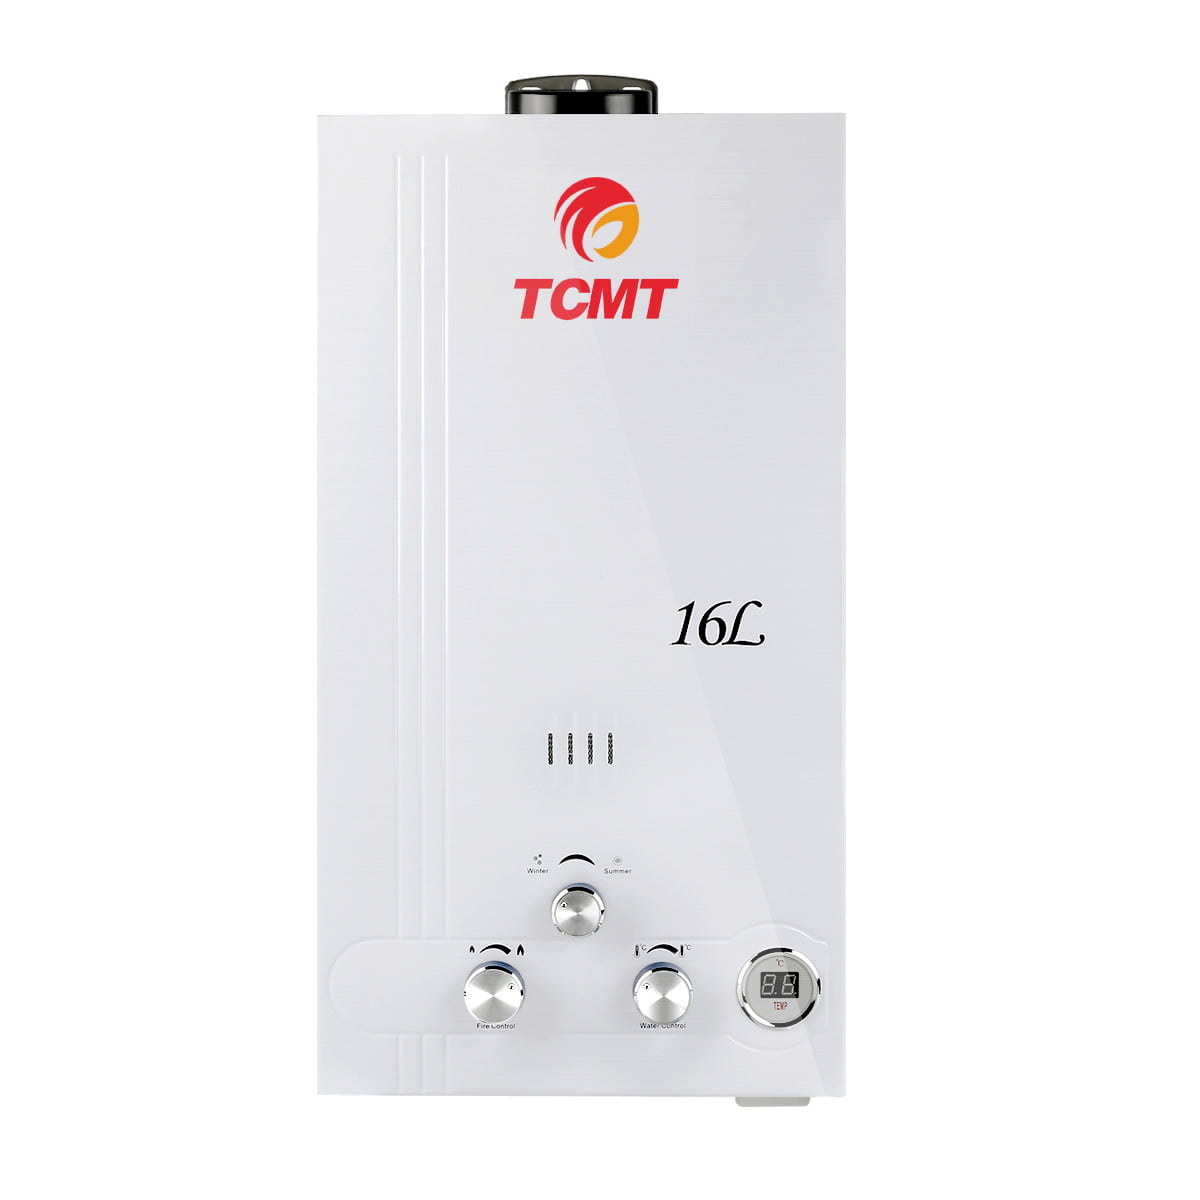 buy-tcmt-4-2-gpm-16l-tankless-water-heater-natural-gas-instant-hot